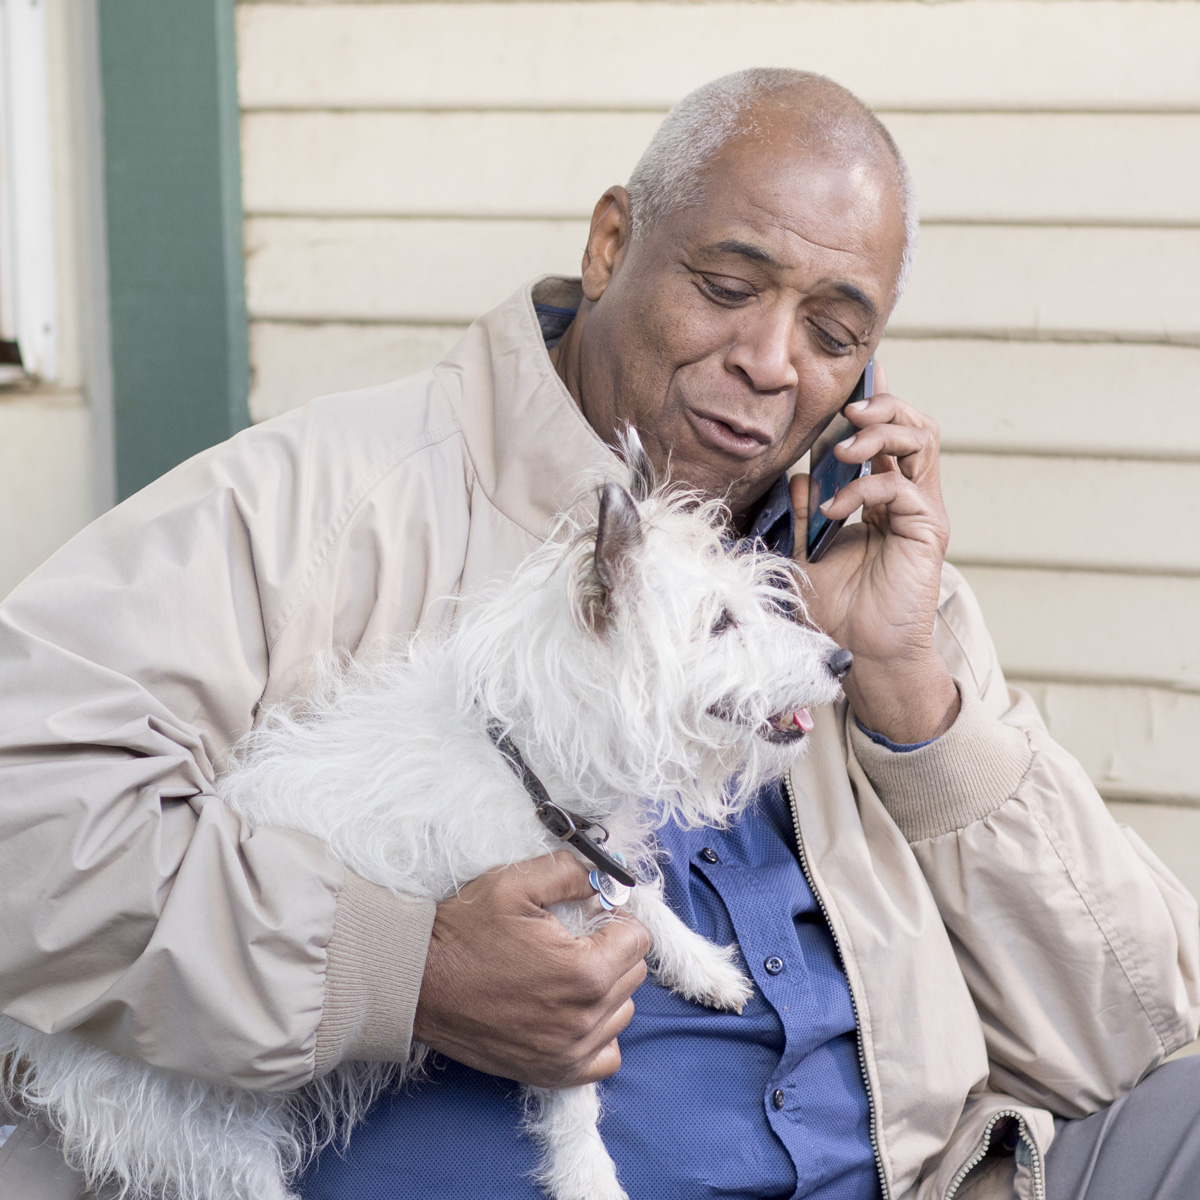 Man on a mobile phone holding a dog